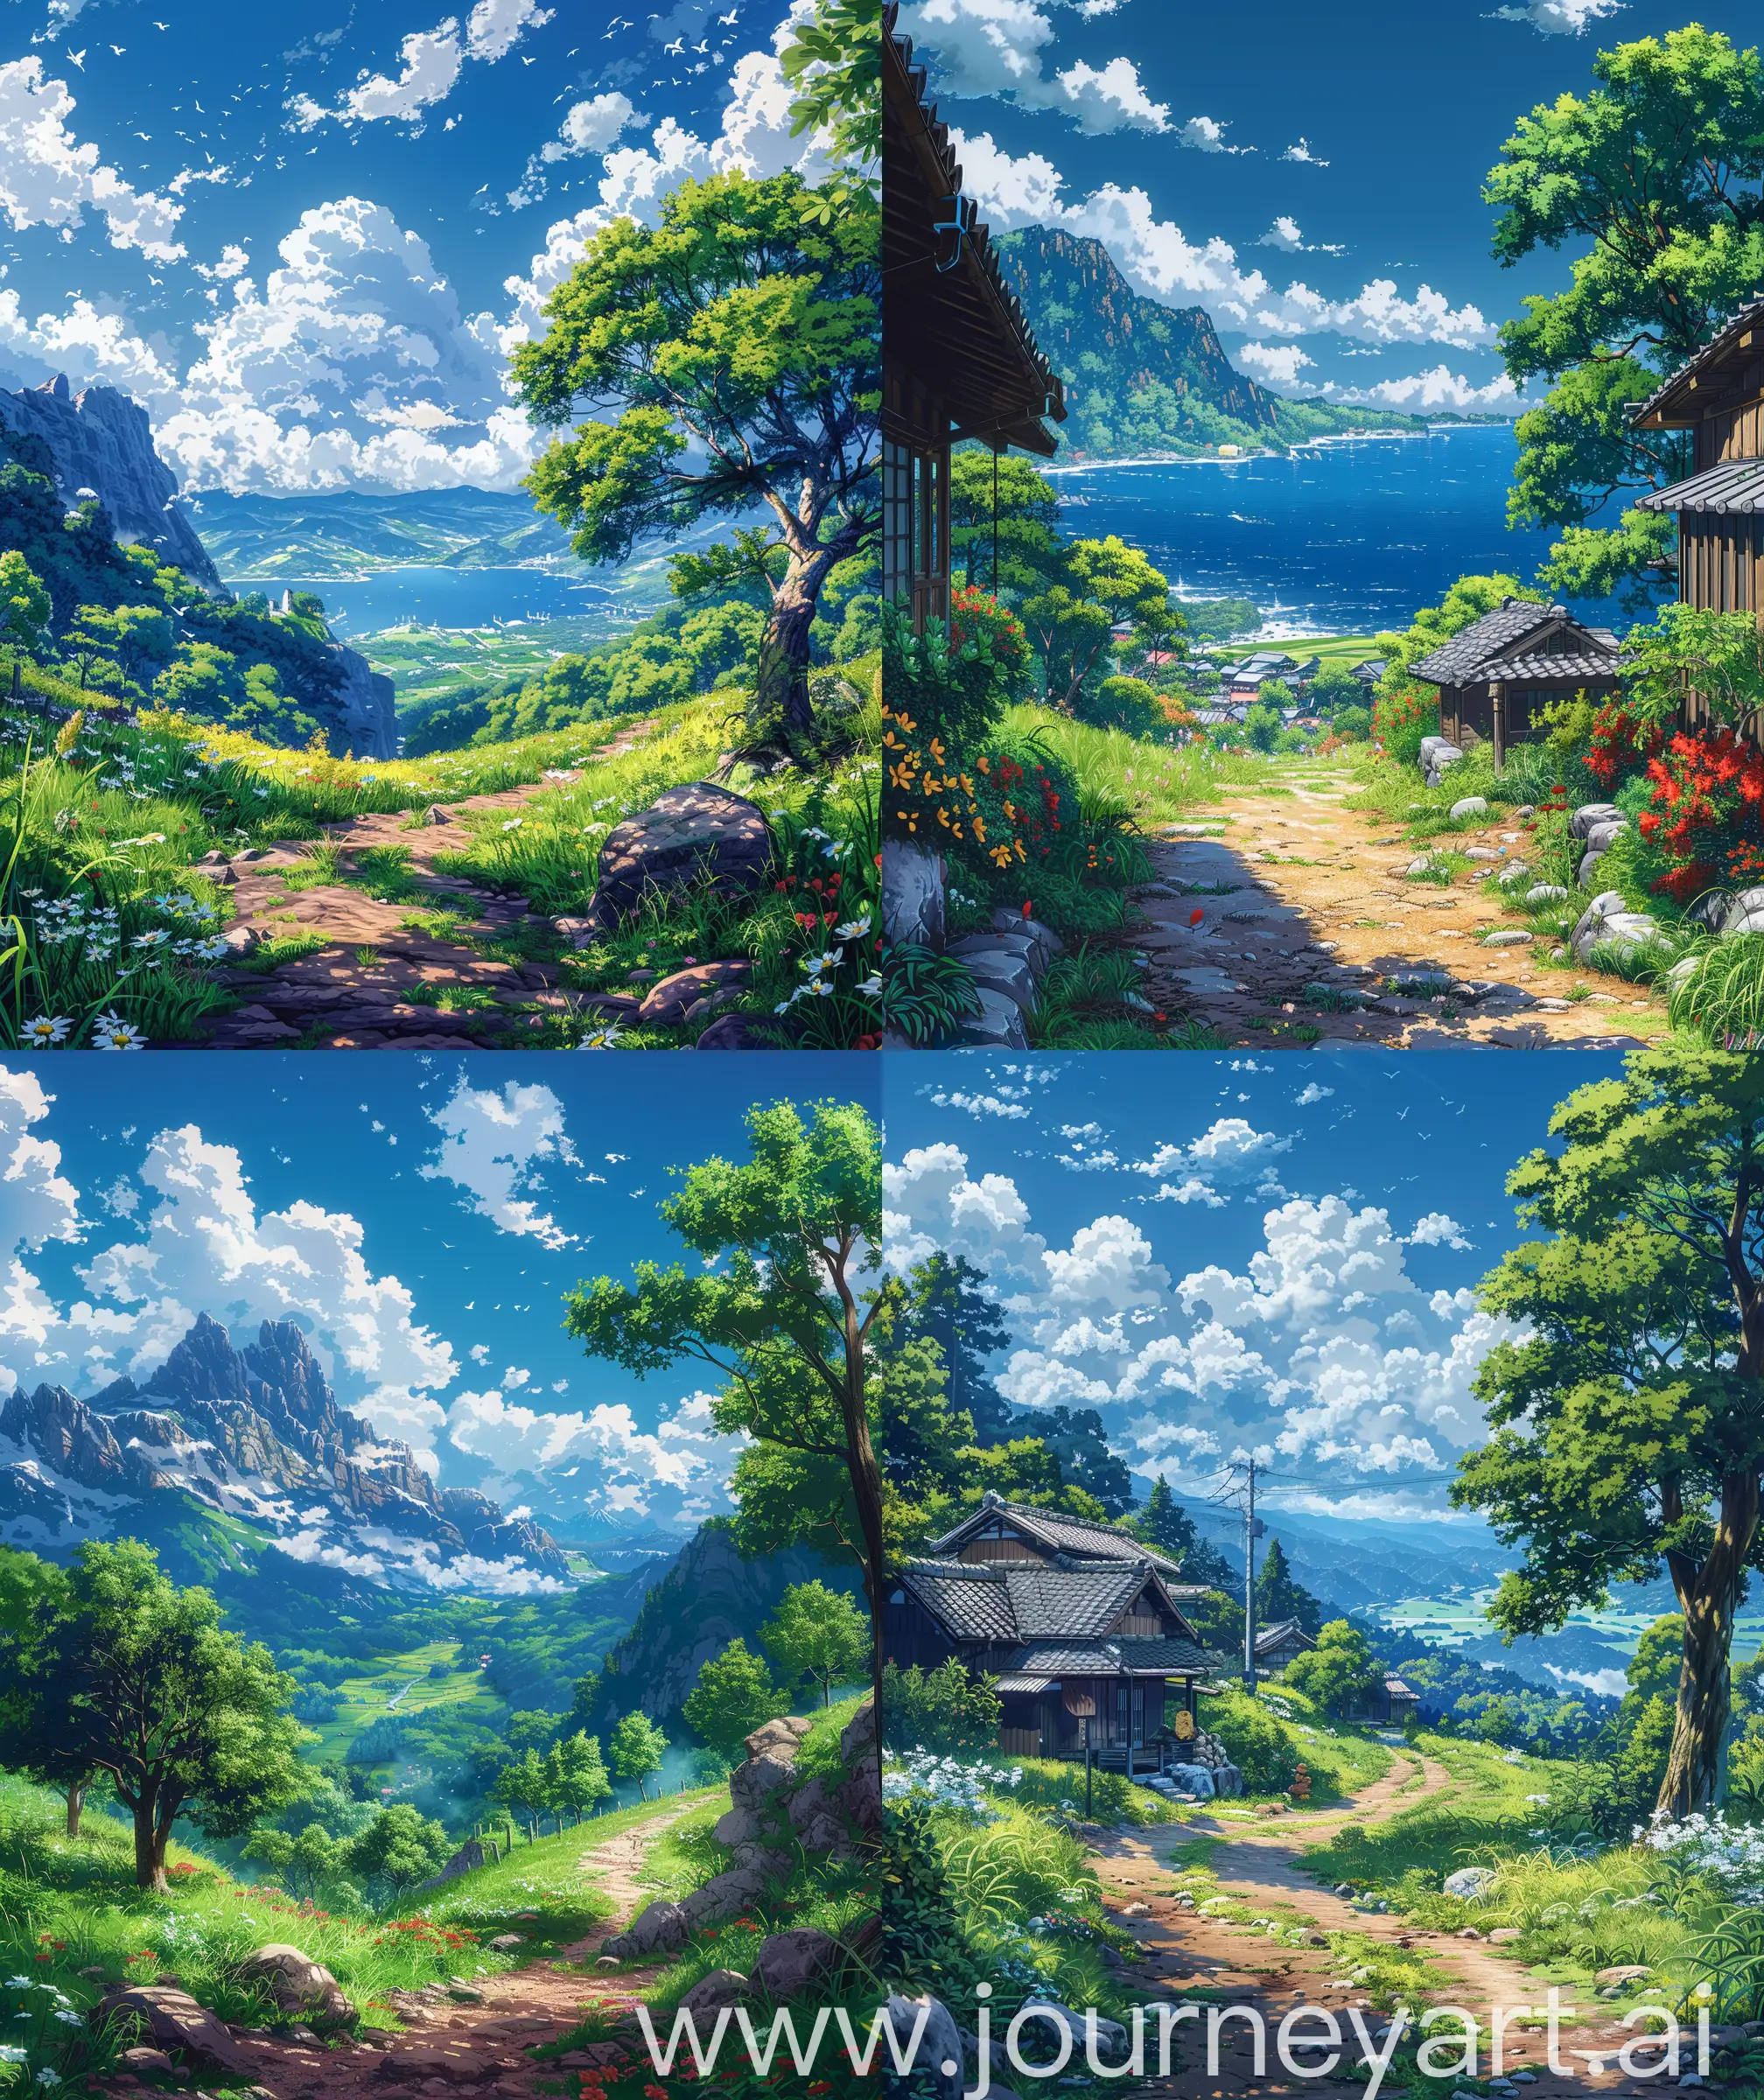 Beautiful anime scenary, mokoto shinkai style,
a beautiful summer time, "verious nature
scenaries ", anime style different places with
quite and calm view, beautiful sky, Day time, illustration ultra HD, high quality, sharp details, no blurry, no hyperrealistic --ar 27:32 --s 600